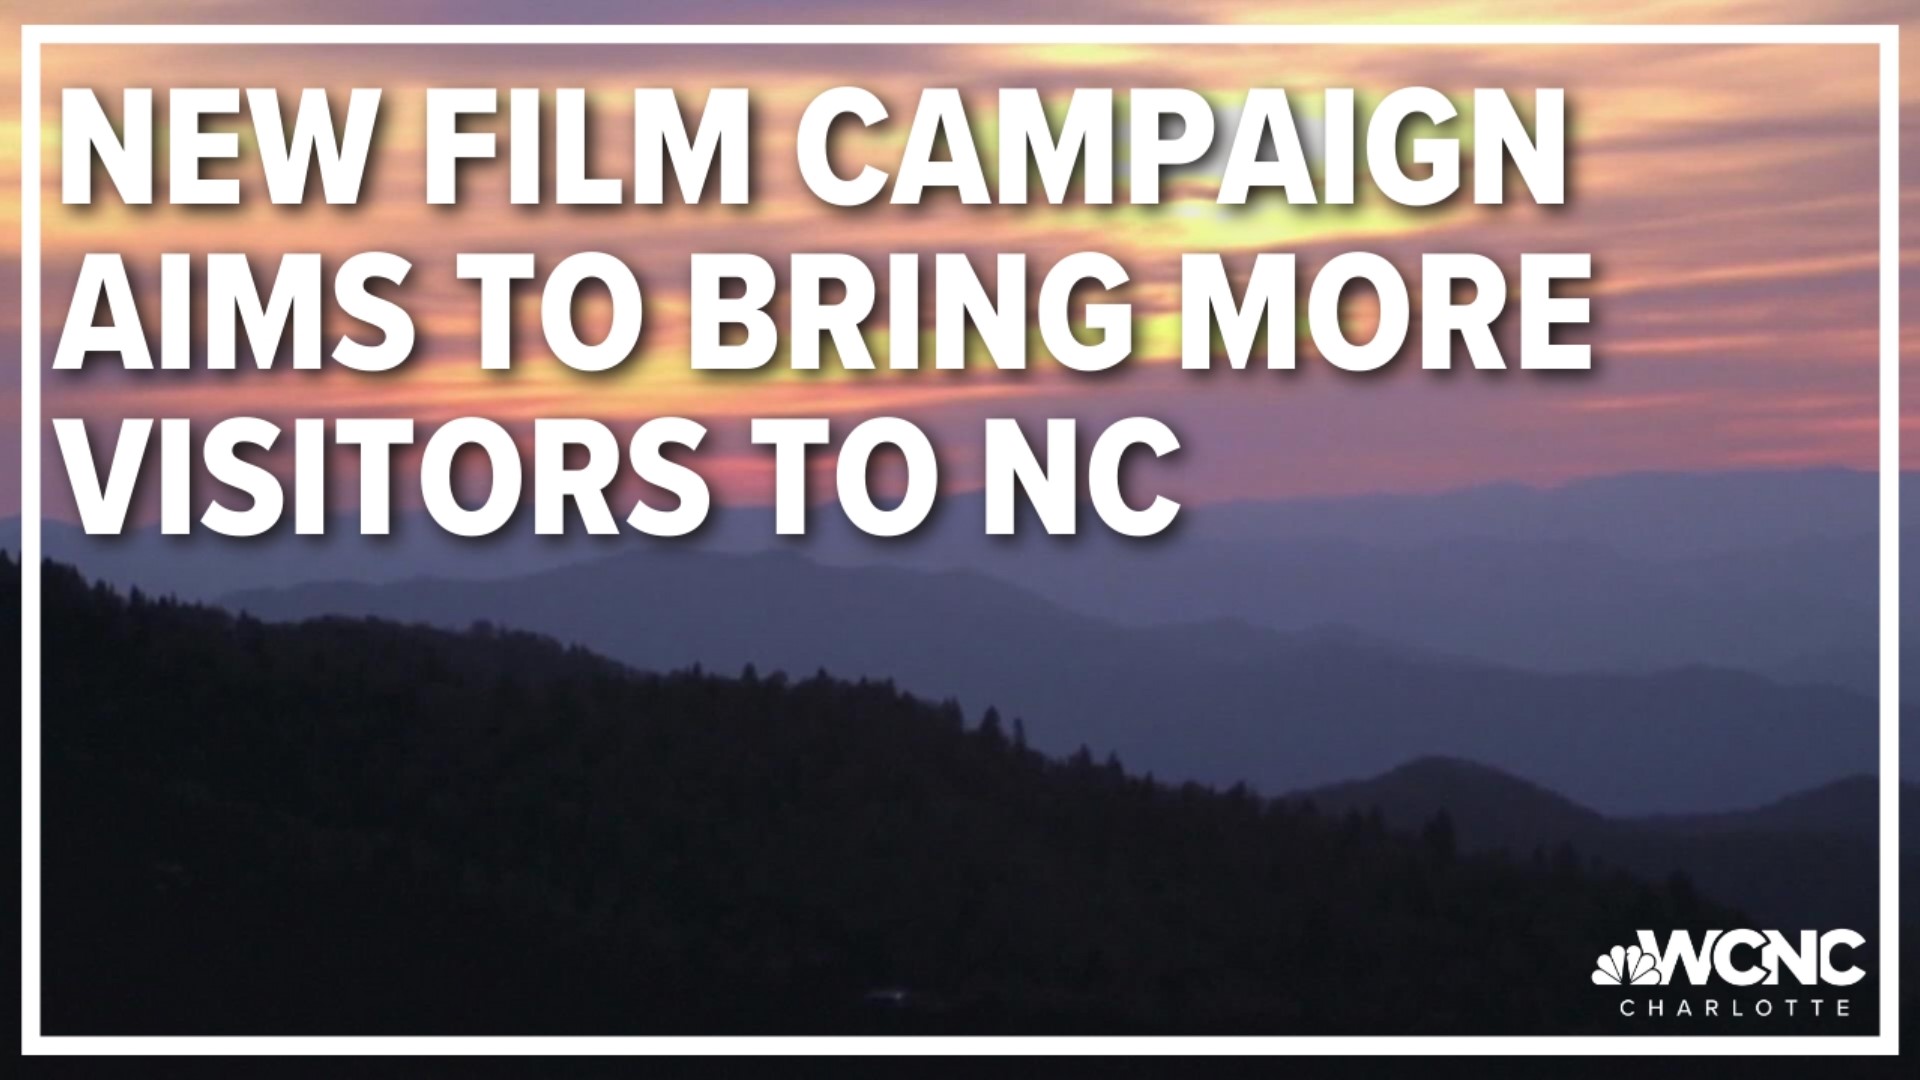 Visit North Carolina is launching a new film campaign, aiming to bring more visitors to the state as tourism bounces back.